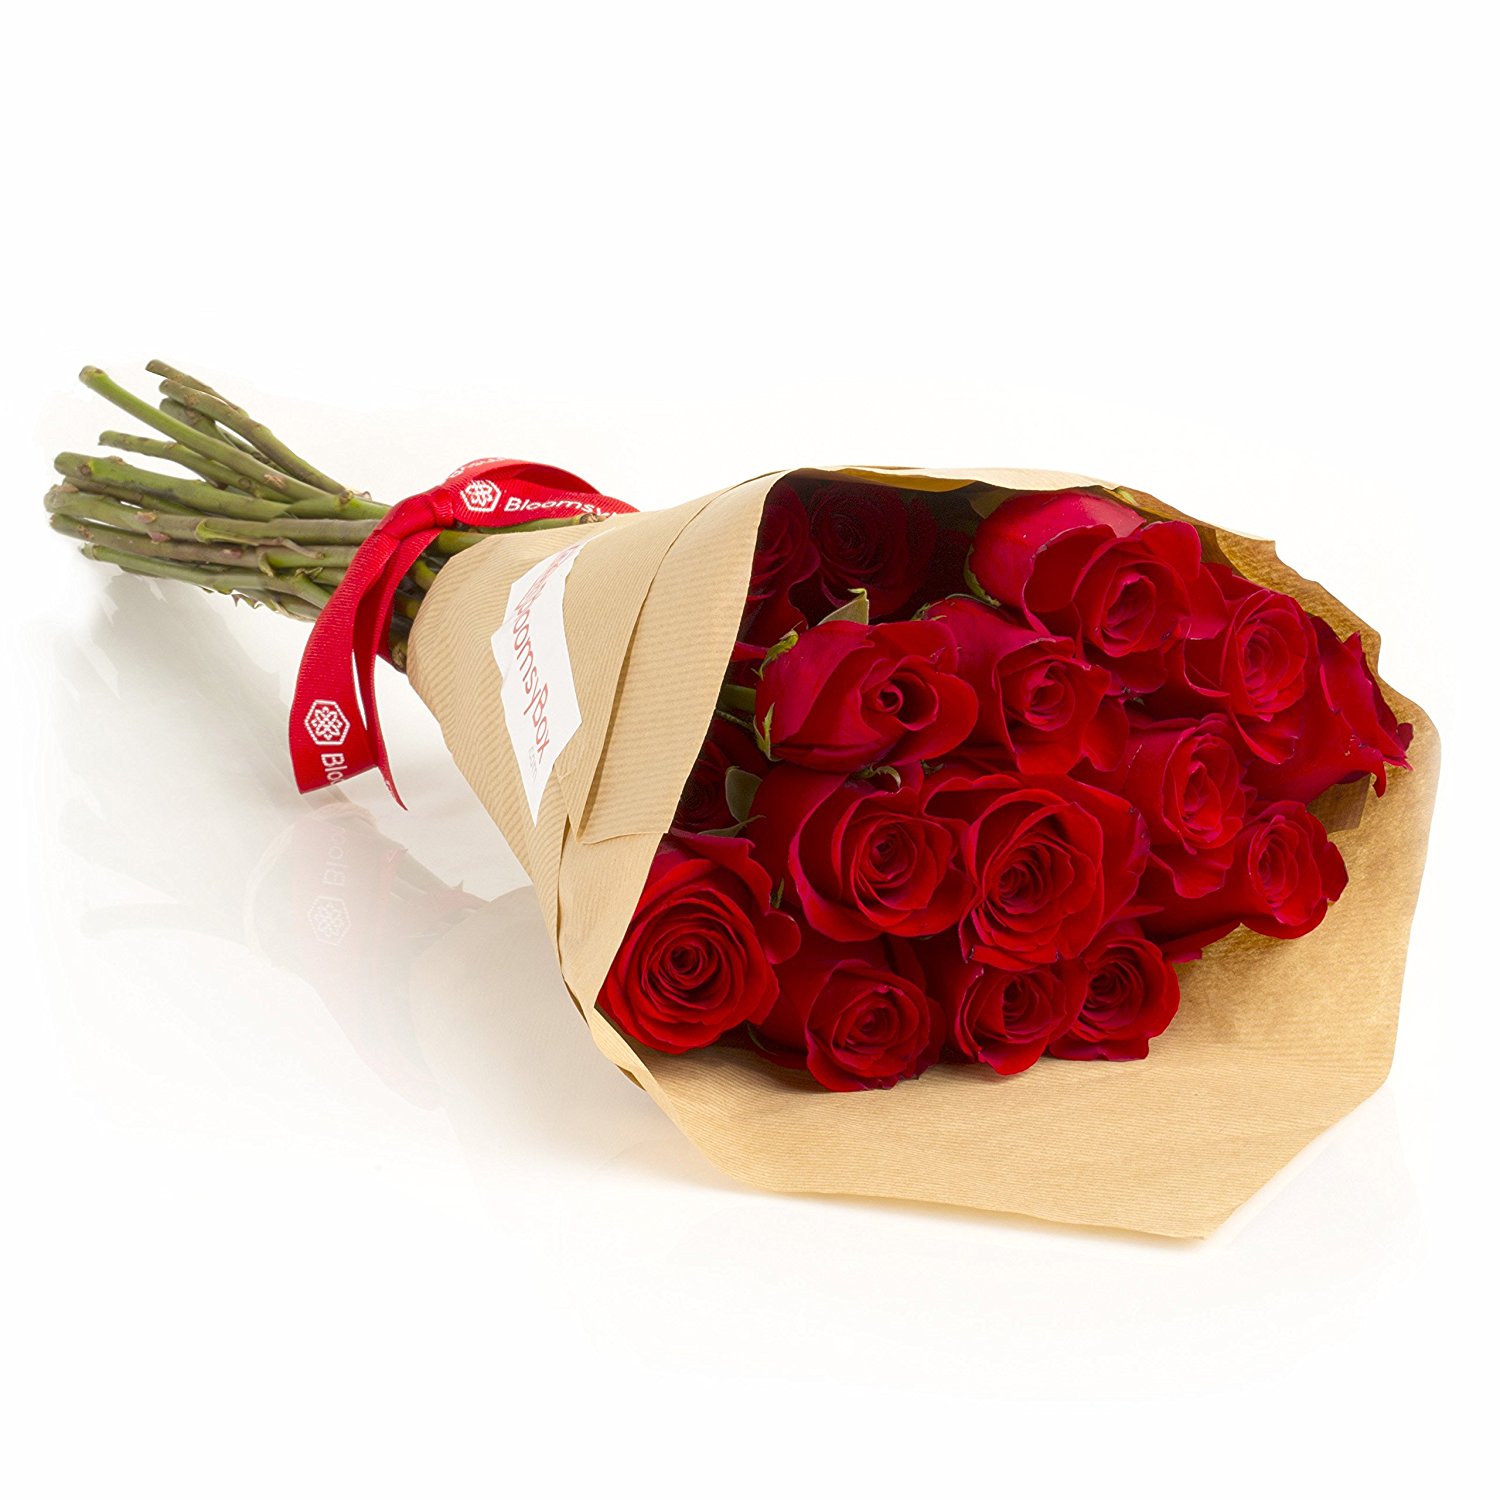 Amazon.com : 24 Long Stem Red Roses Hand-tied Bouquet -No Vase ...